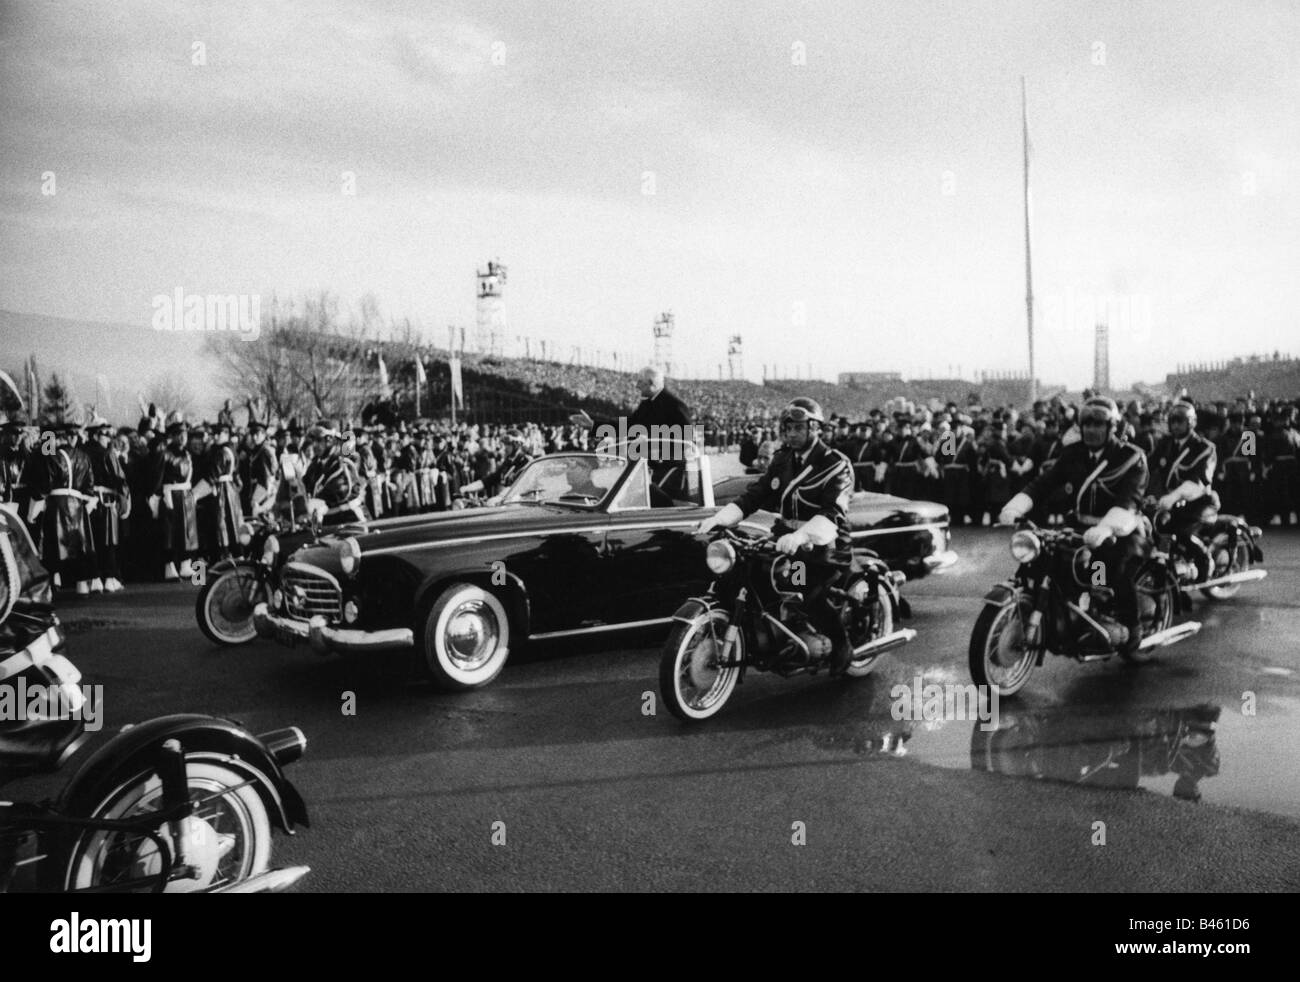 sport, Olympic Games, Grenoble, 6.2.1968 - 18.23.1968, opening, arrival of President Charles de Gaulle, 6.2.1968, car, police escort, X olympiad, winter games, France, 20th century, historic, historical, people, 1960s, Stock Photo